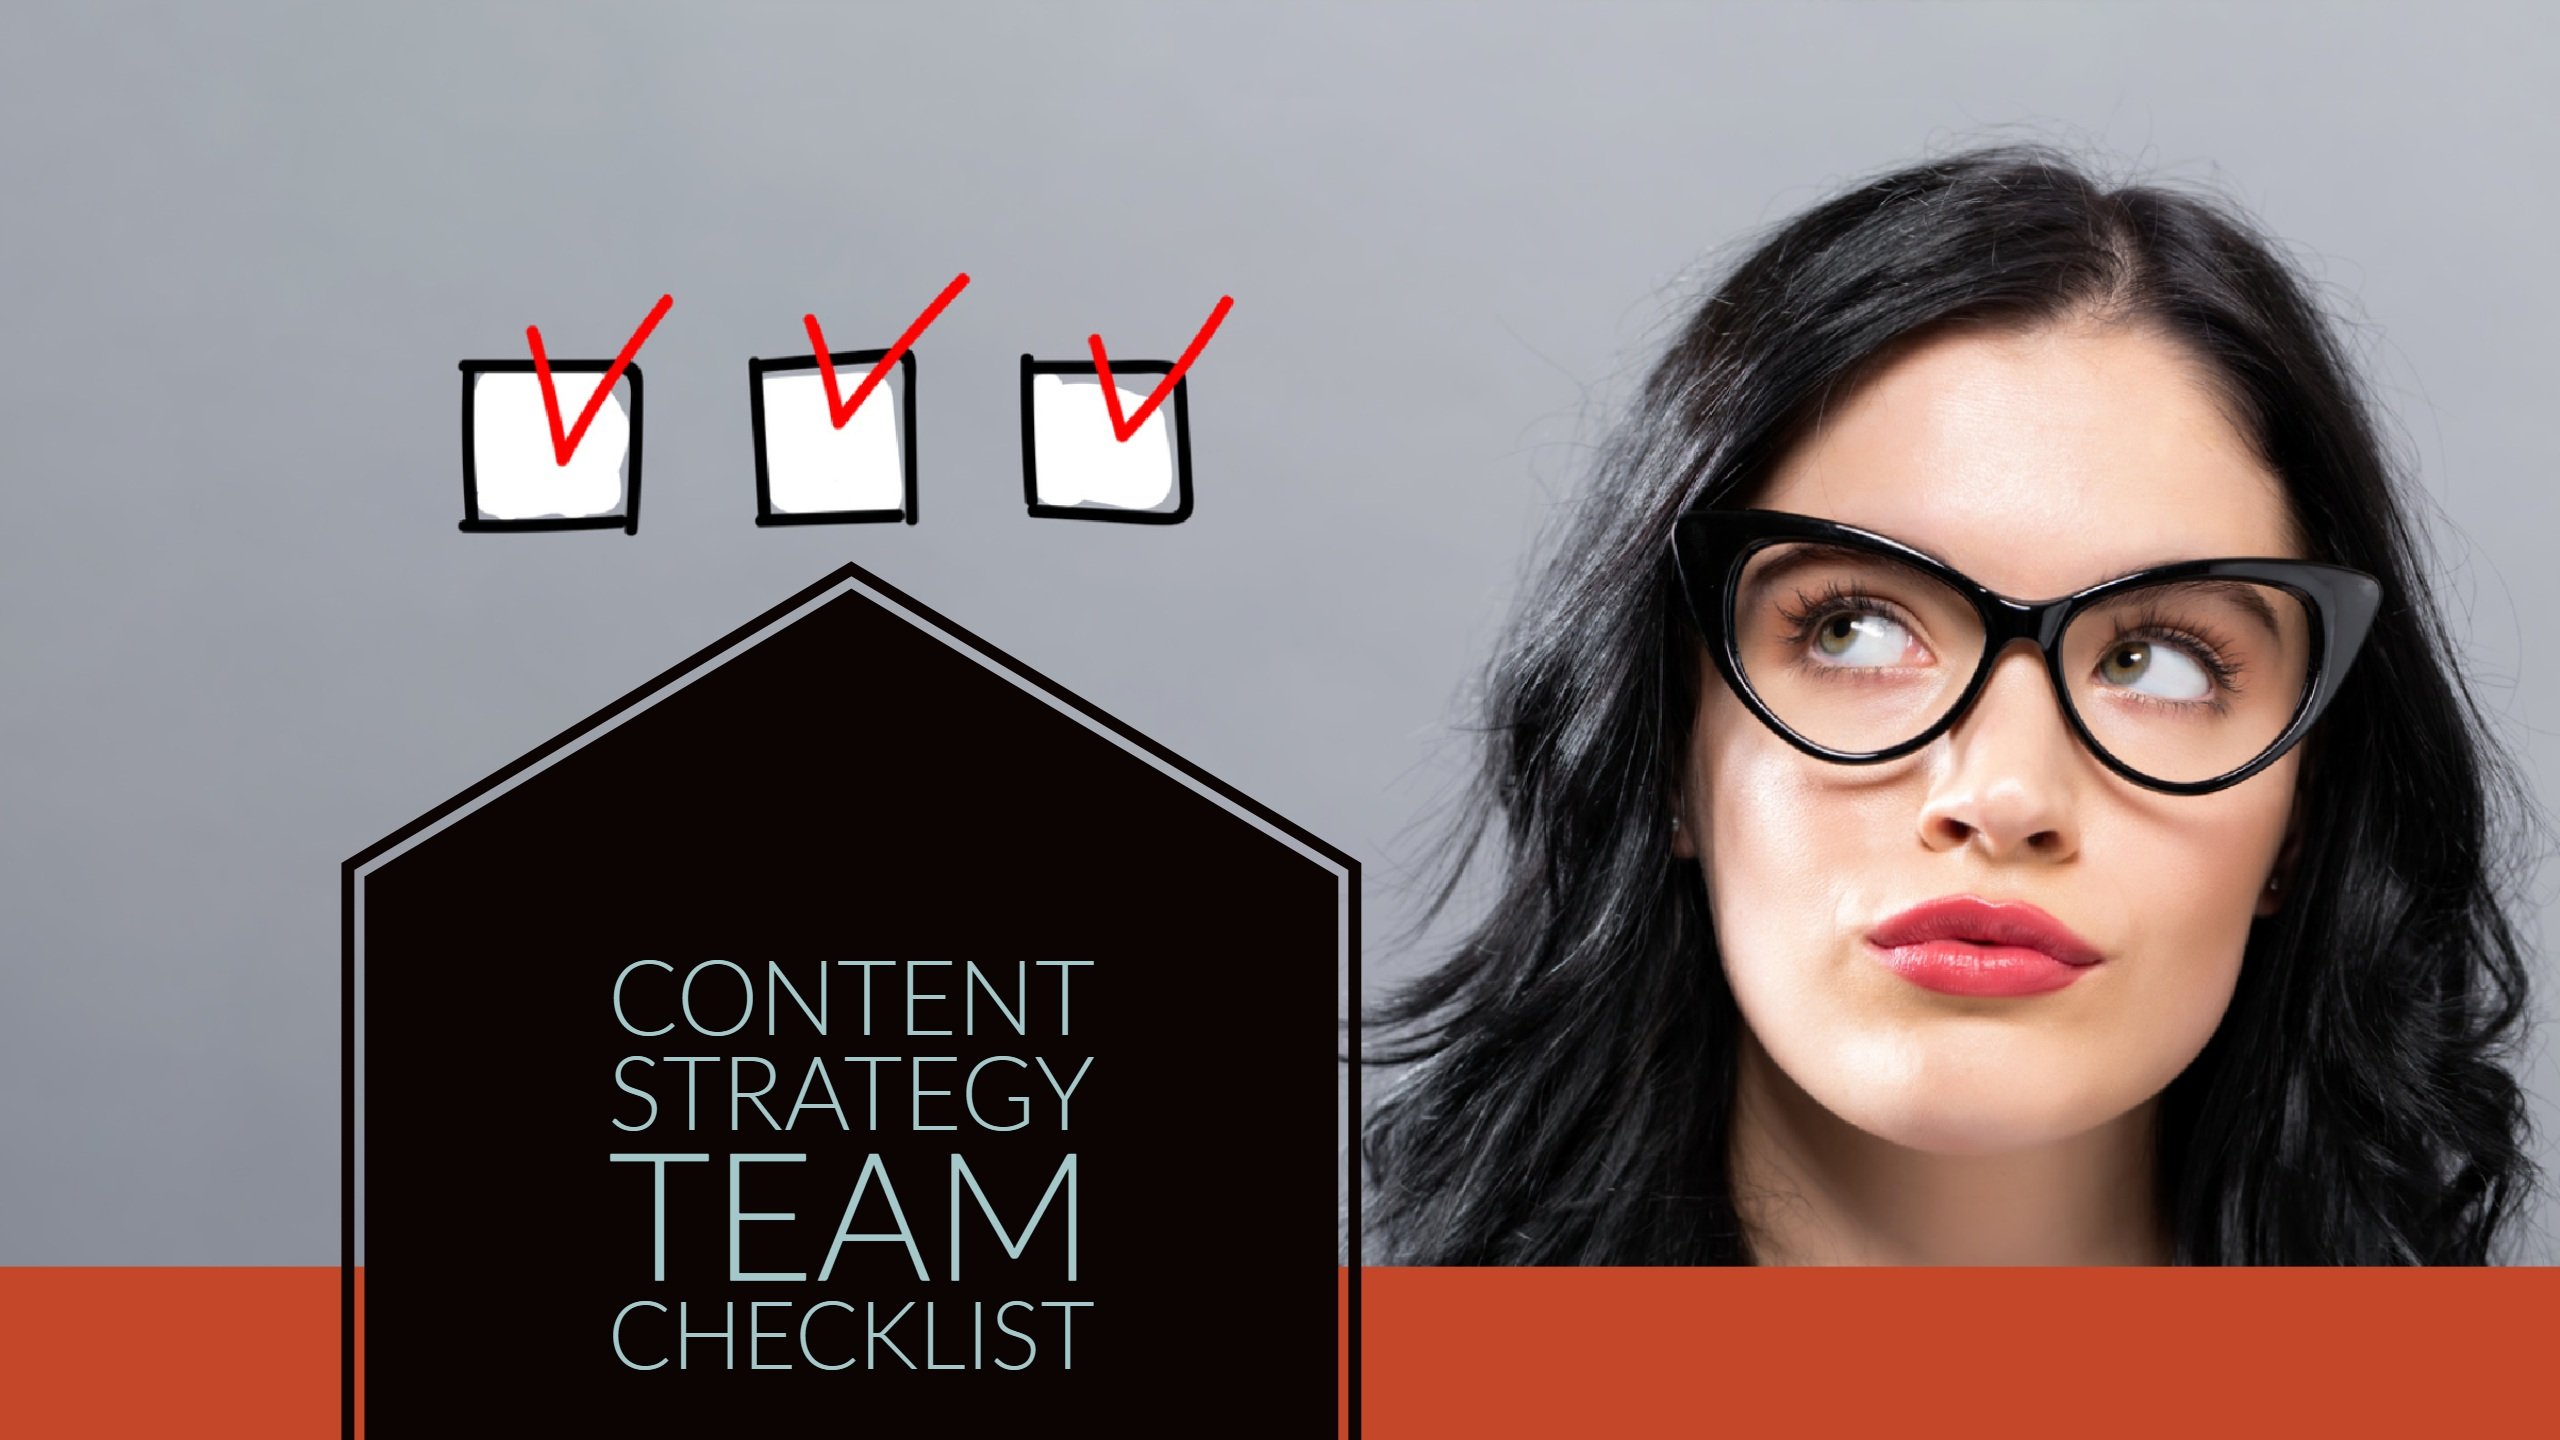 Who Is On Your Communication & Content Strategy Team? A Checklist